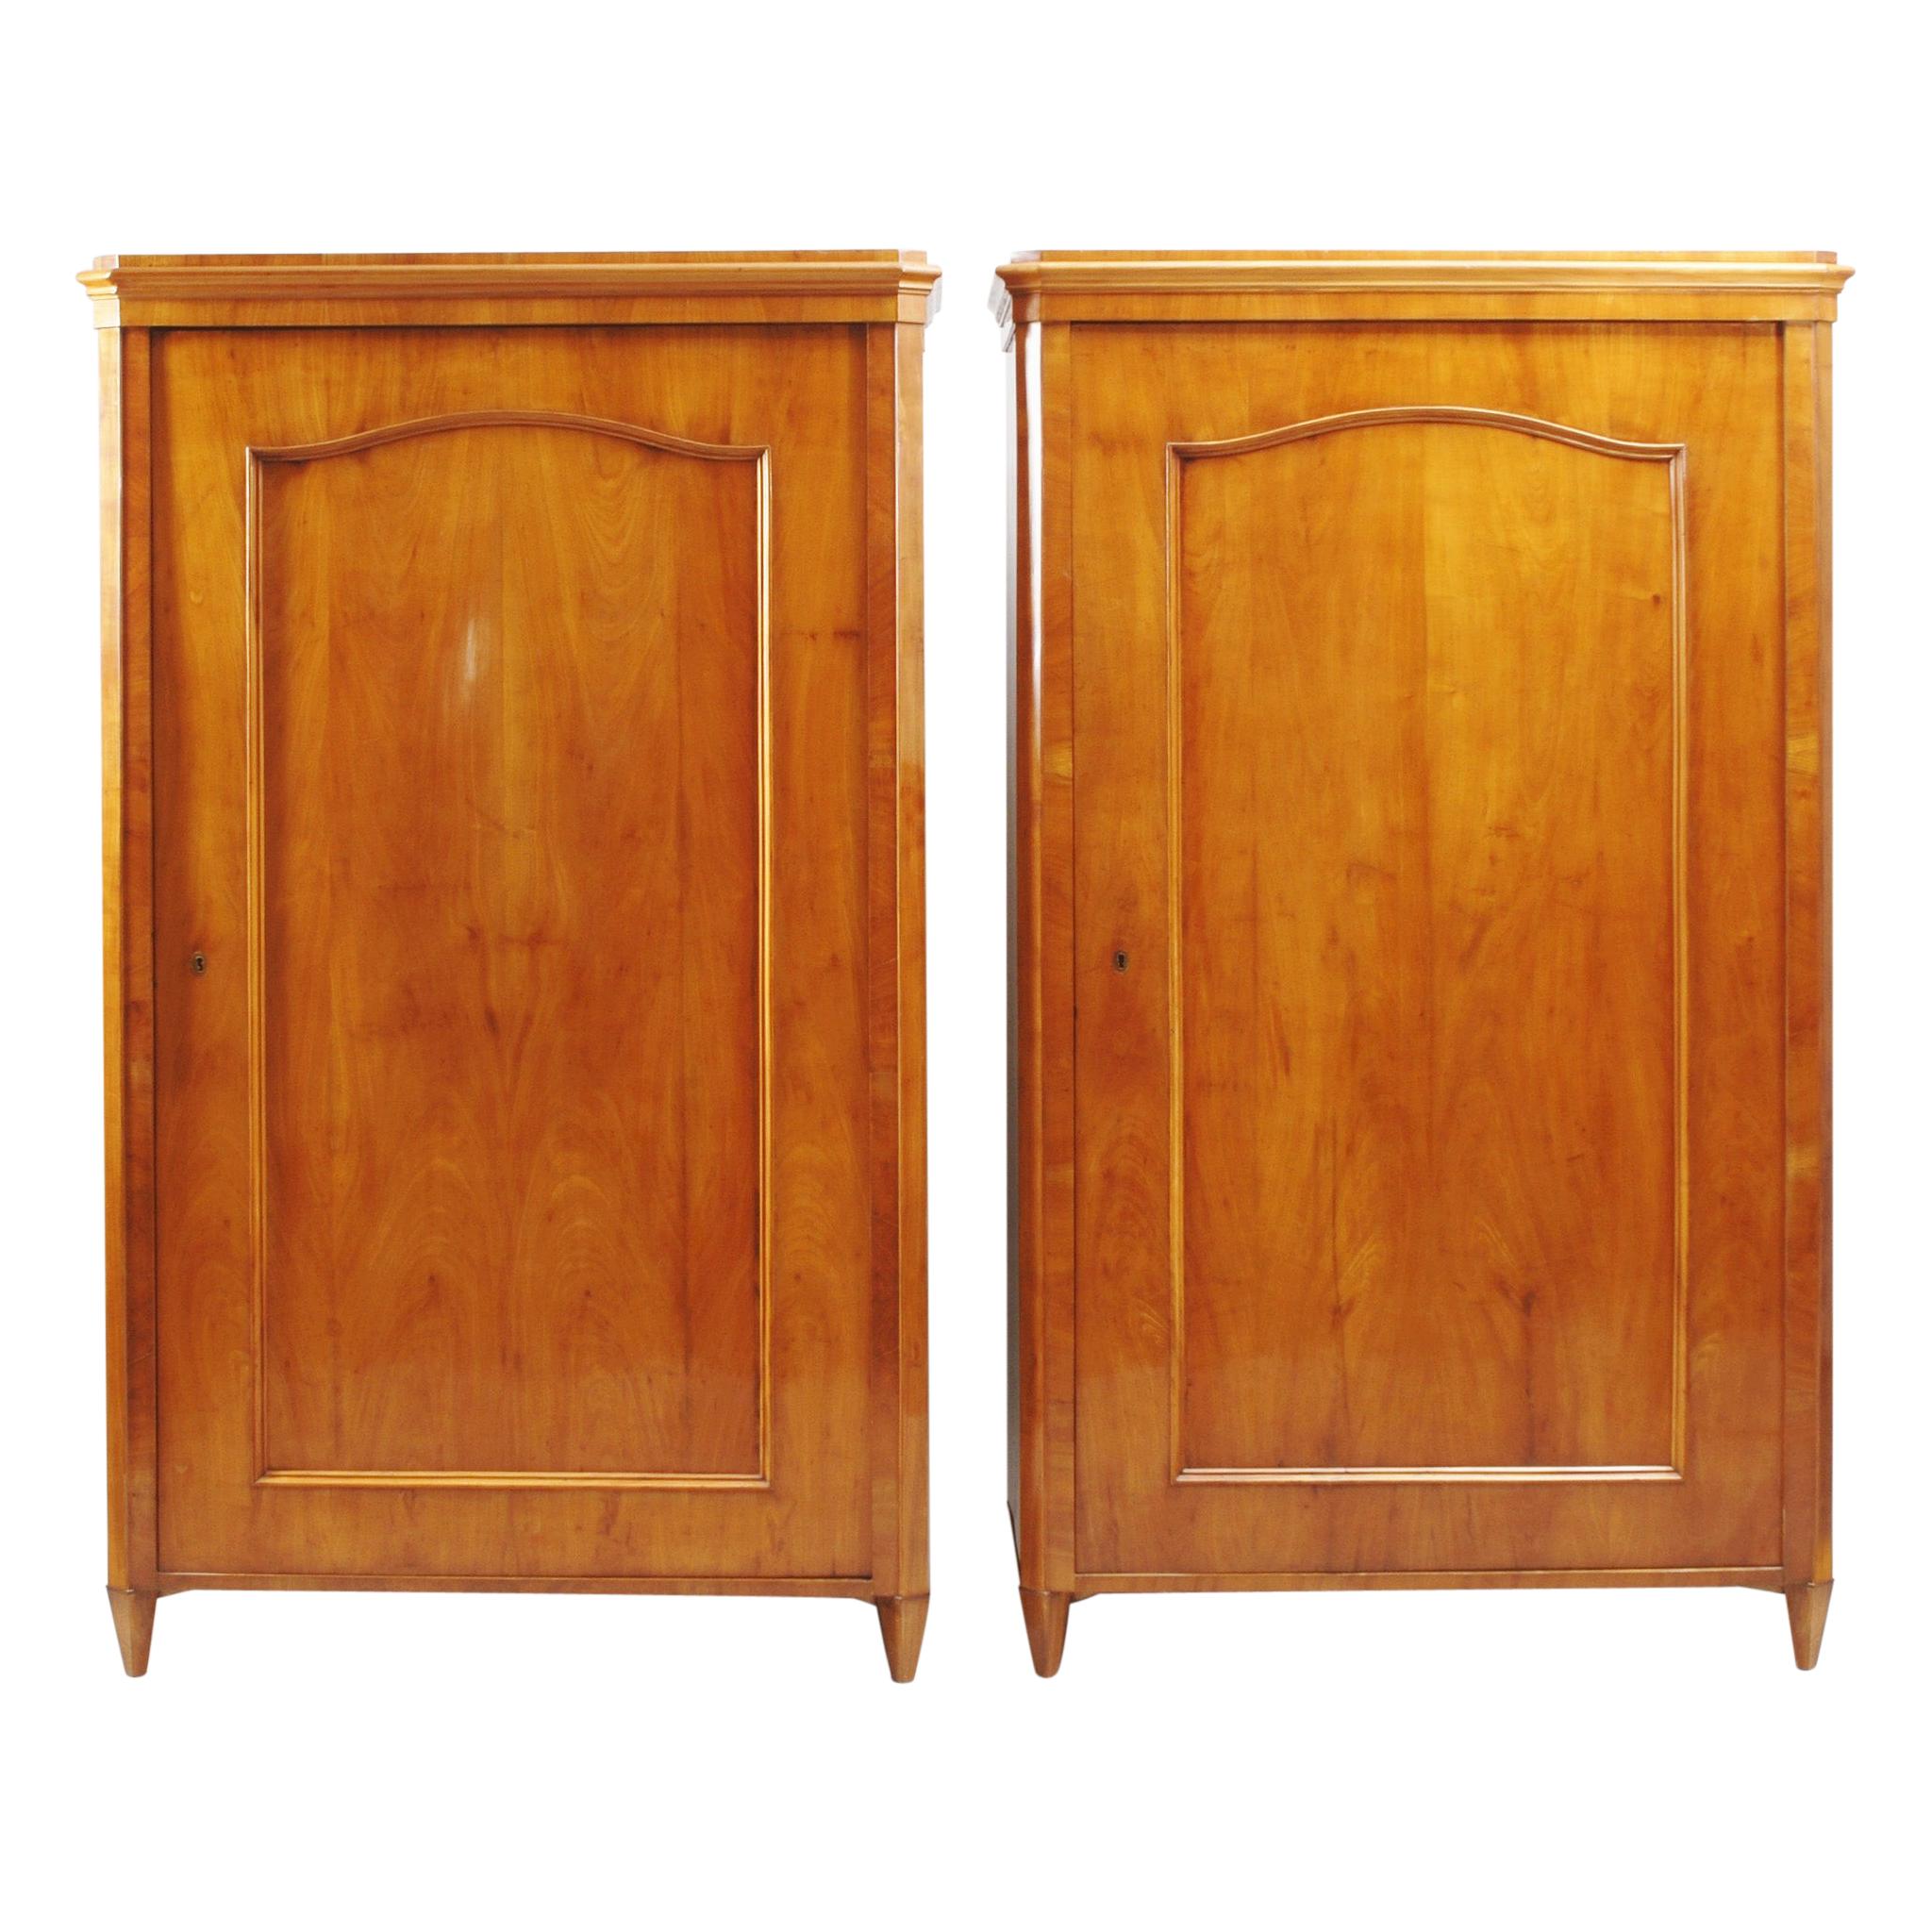 19th Century Biedermeier Pair of Cherry Cabinets, Completely Restored, 1840s